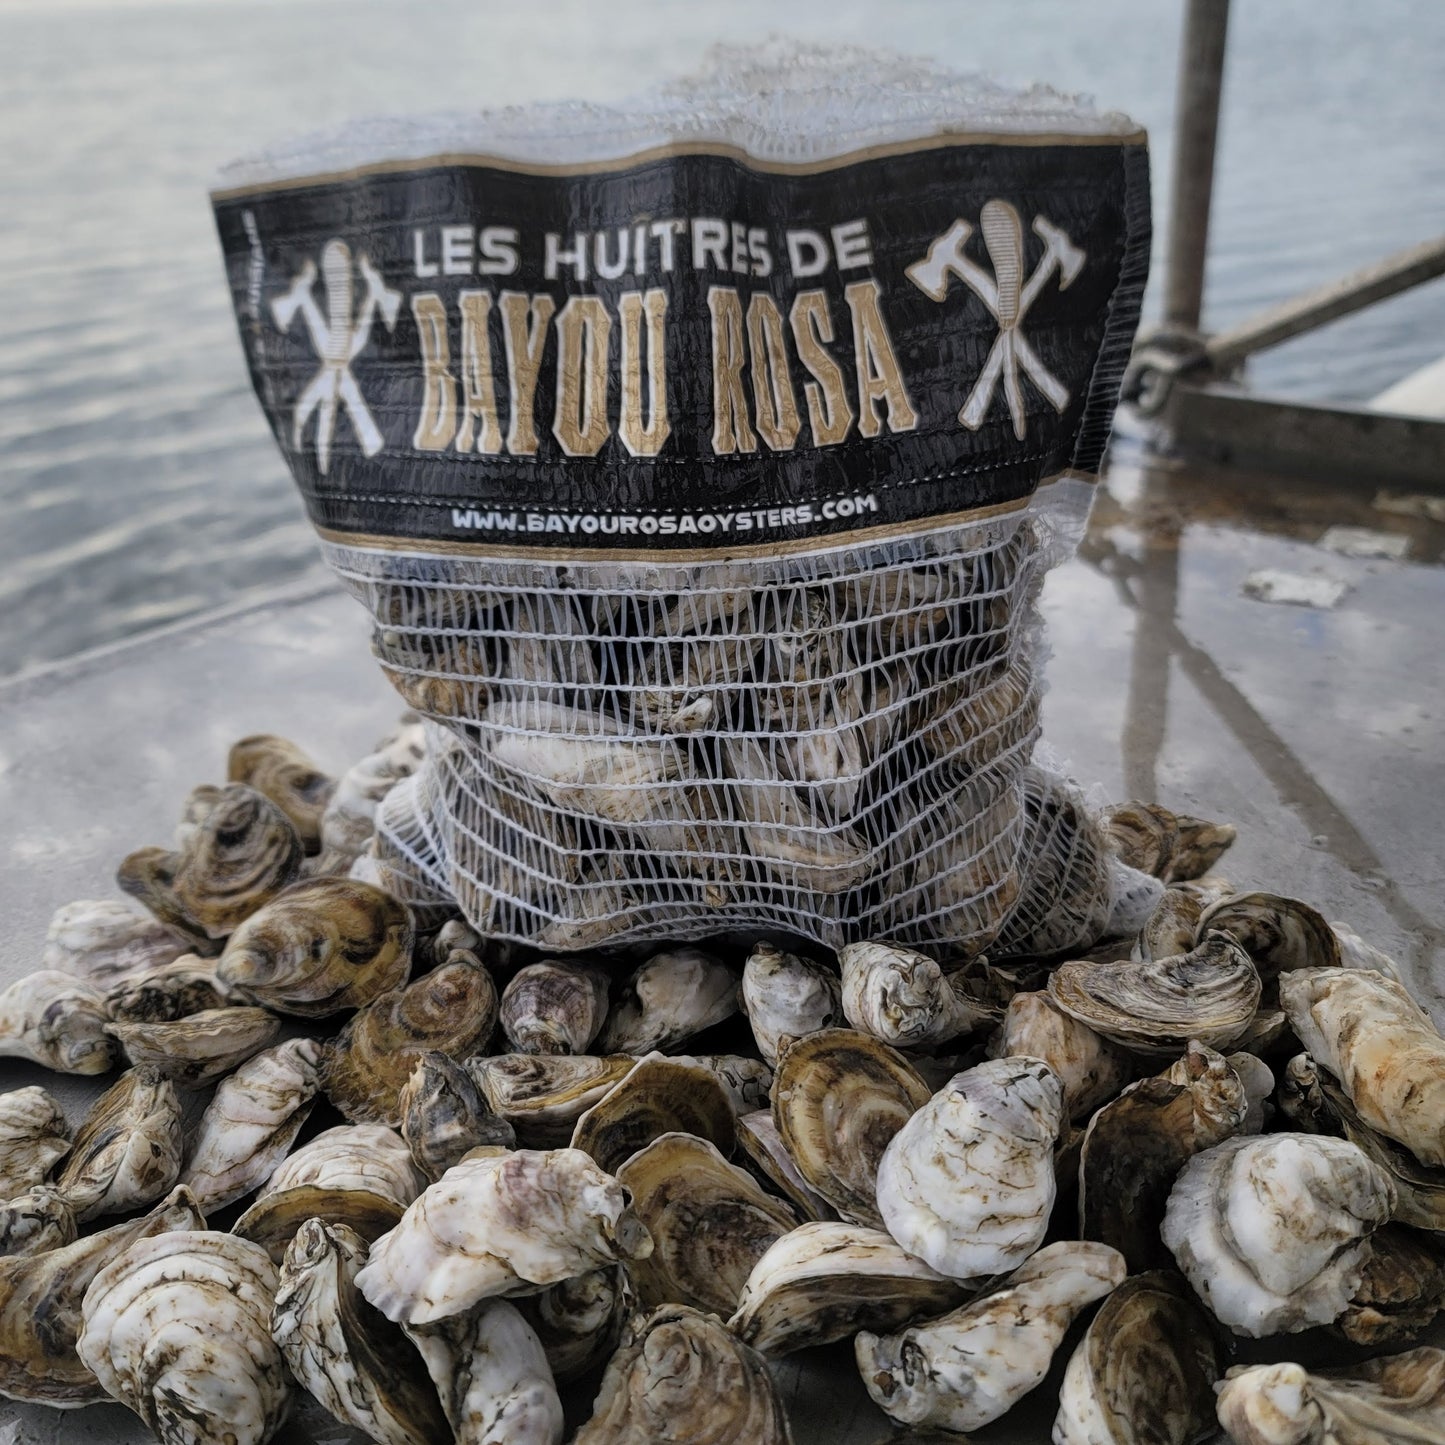 50 Oysters DELIVERED December  17th  to New Orleans Area (See PARISHES in Description)